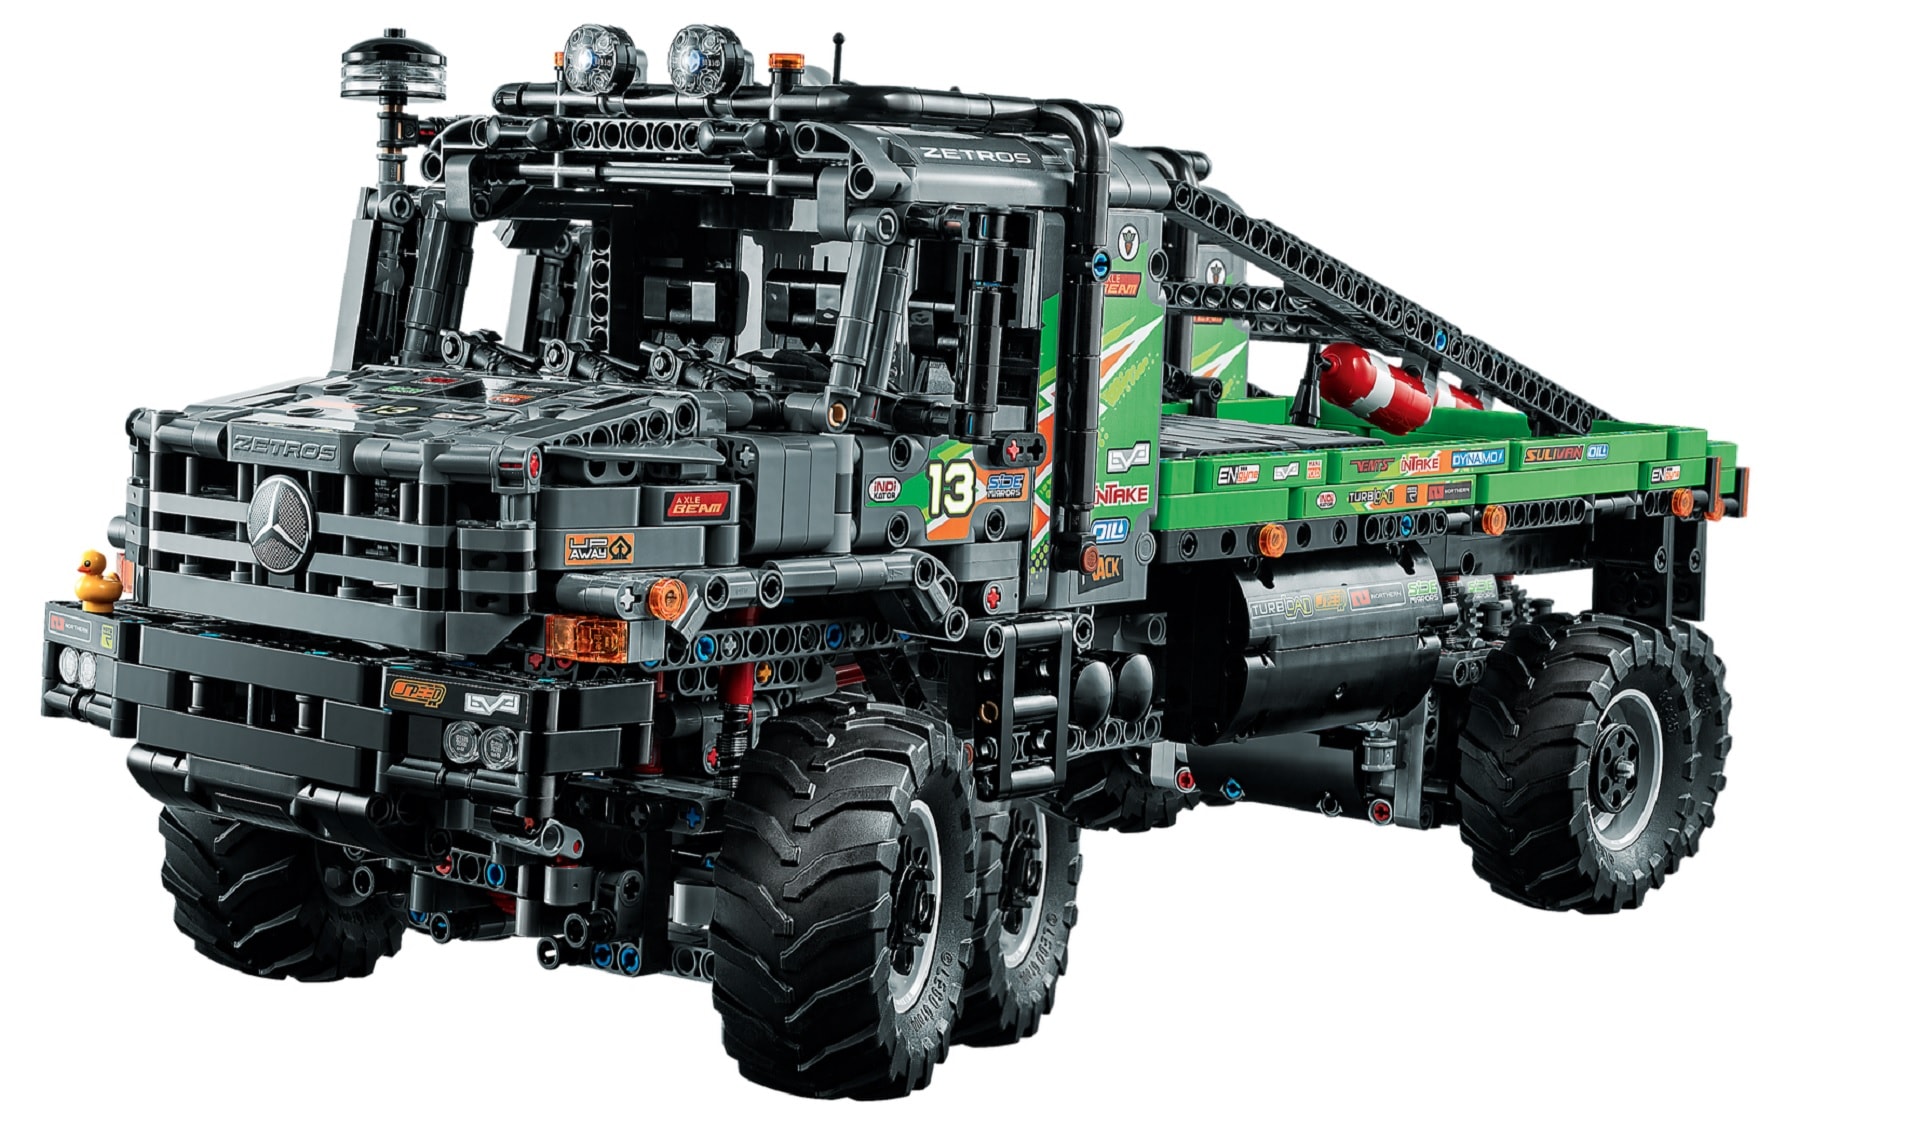 New Heavy Duty Sets From LEGO Include 4x4 Mercedes Zetros and a Truck autoevolution